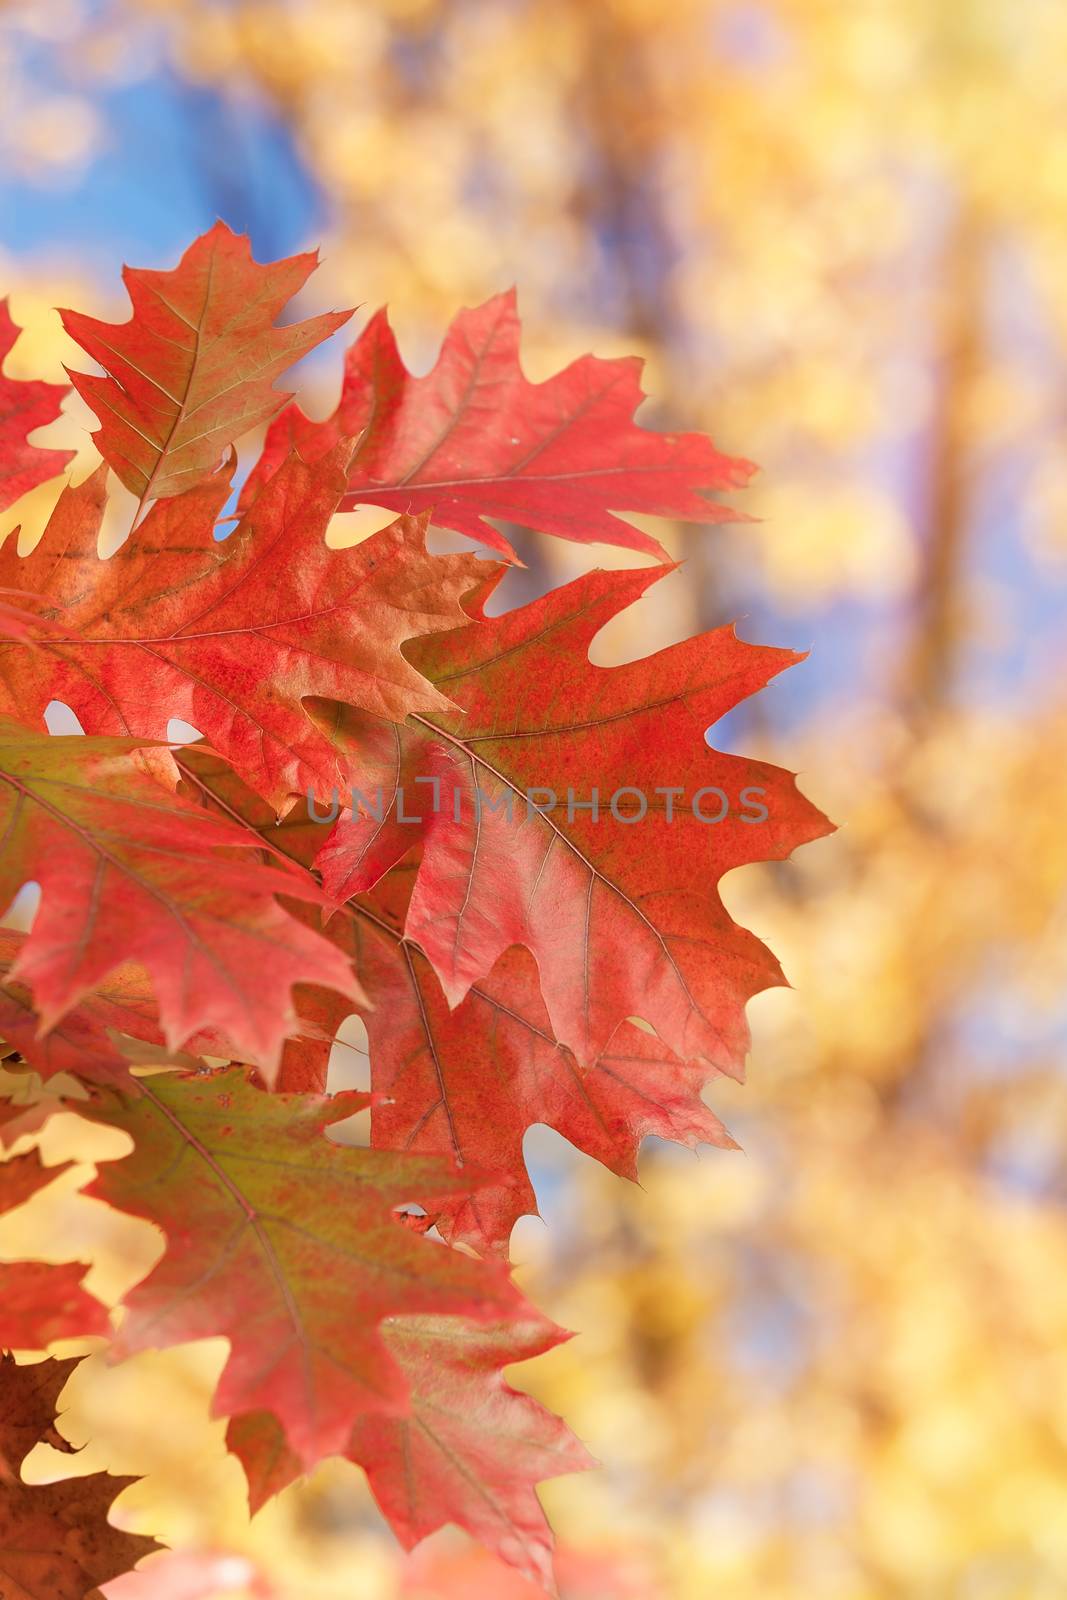 Close up of red autumn foliage over blurred background. Soft and blur style for background. A photo with shallow depth of field